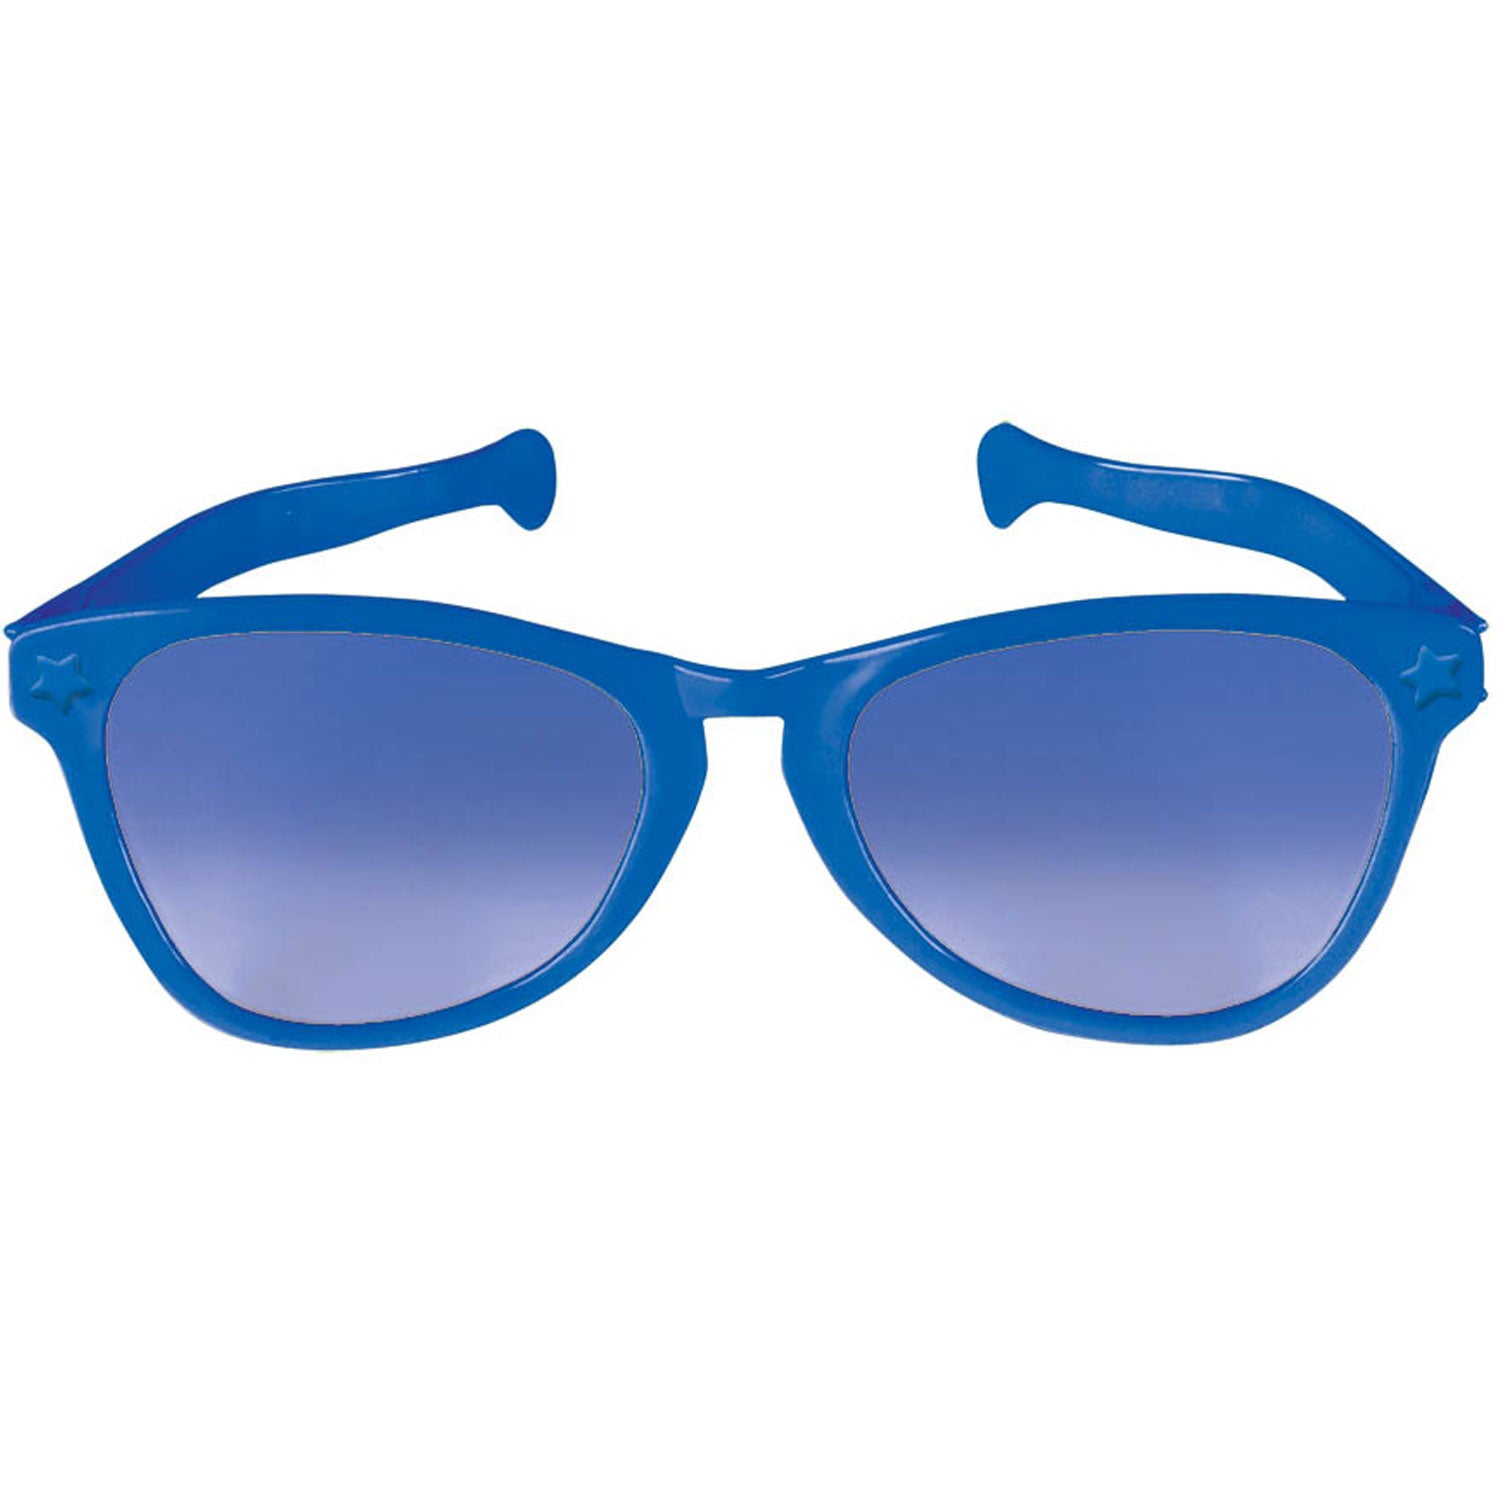 Blue Jumbo Glasses Costumes & Apparel - Party Centre